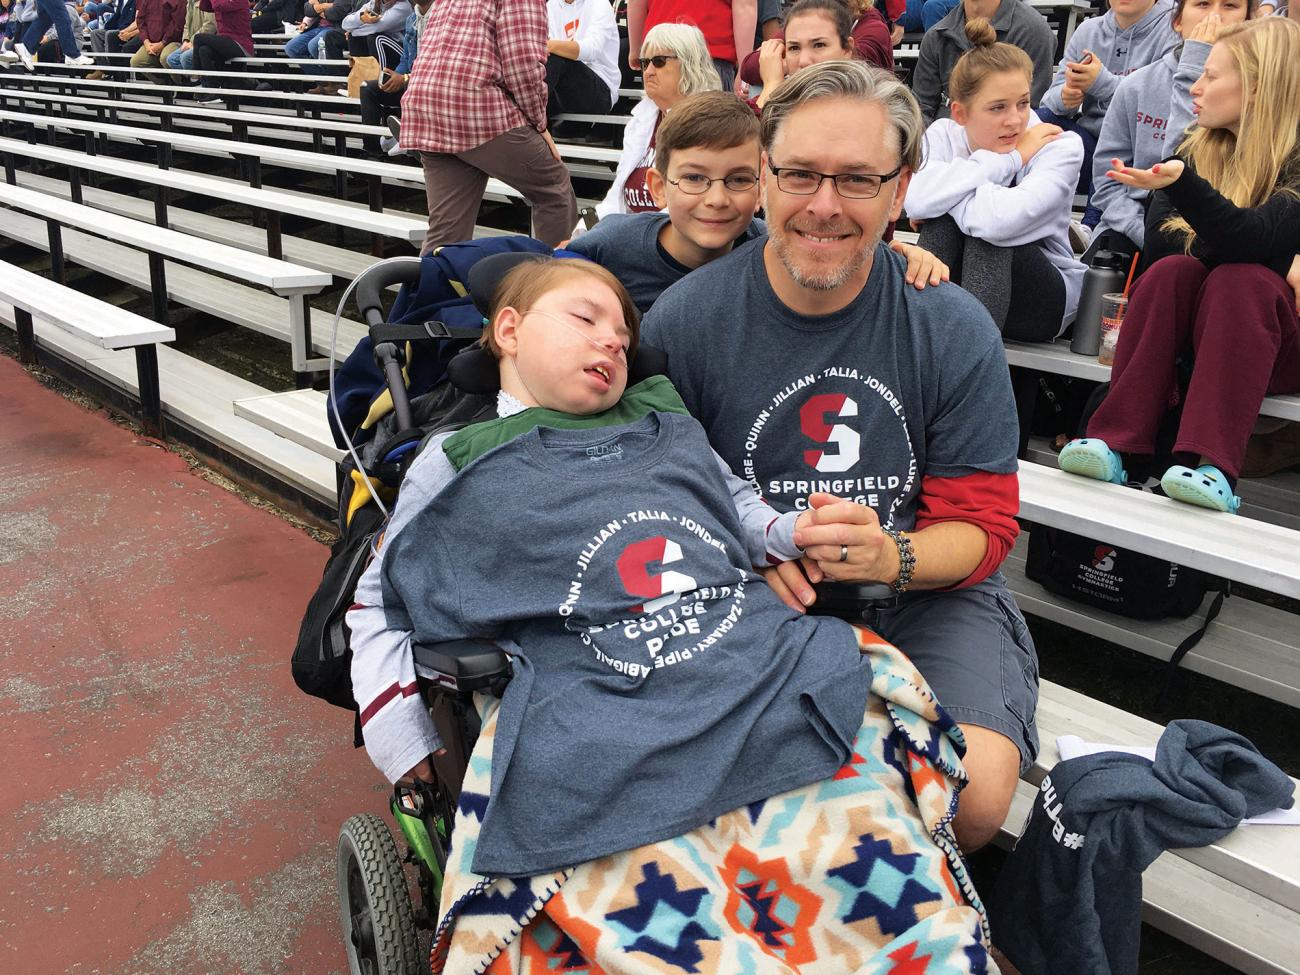 Team IMPACT participant and Men's Gymnastics teammate Zachary LaBroad and his father Eric Volz Benoit attend a Pride football game.